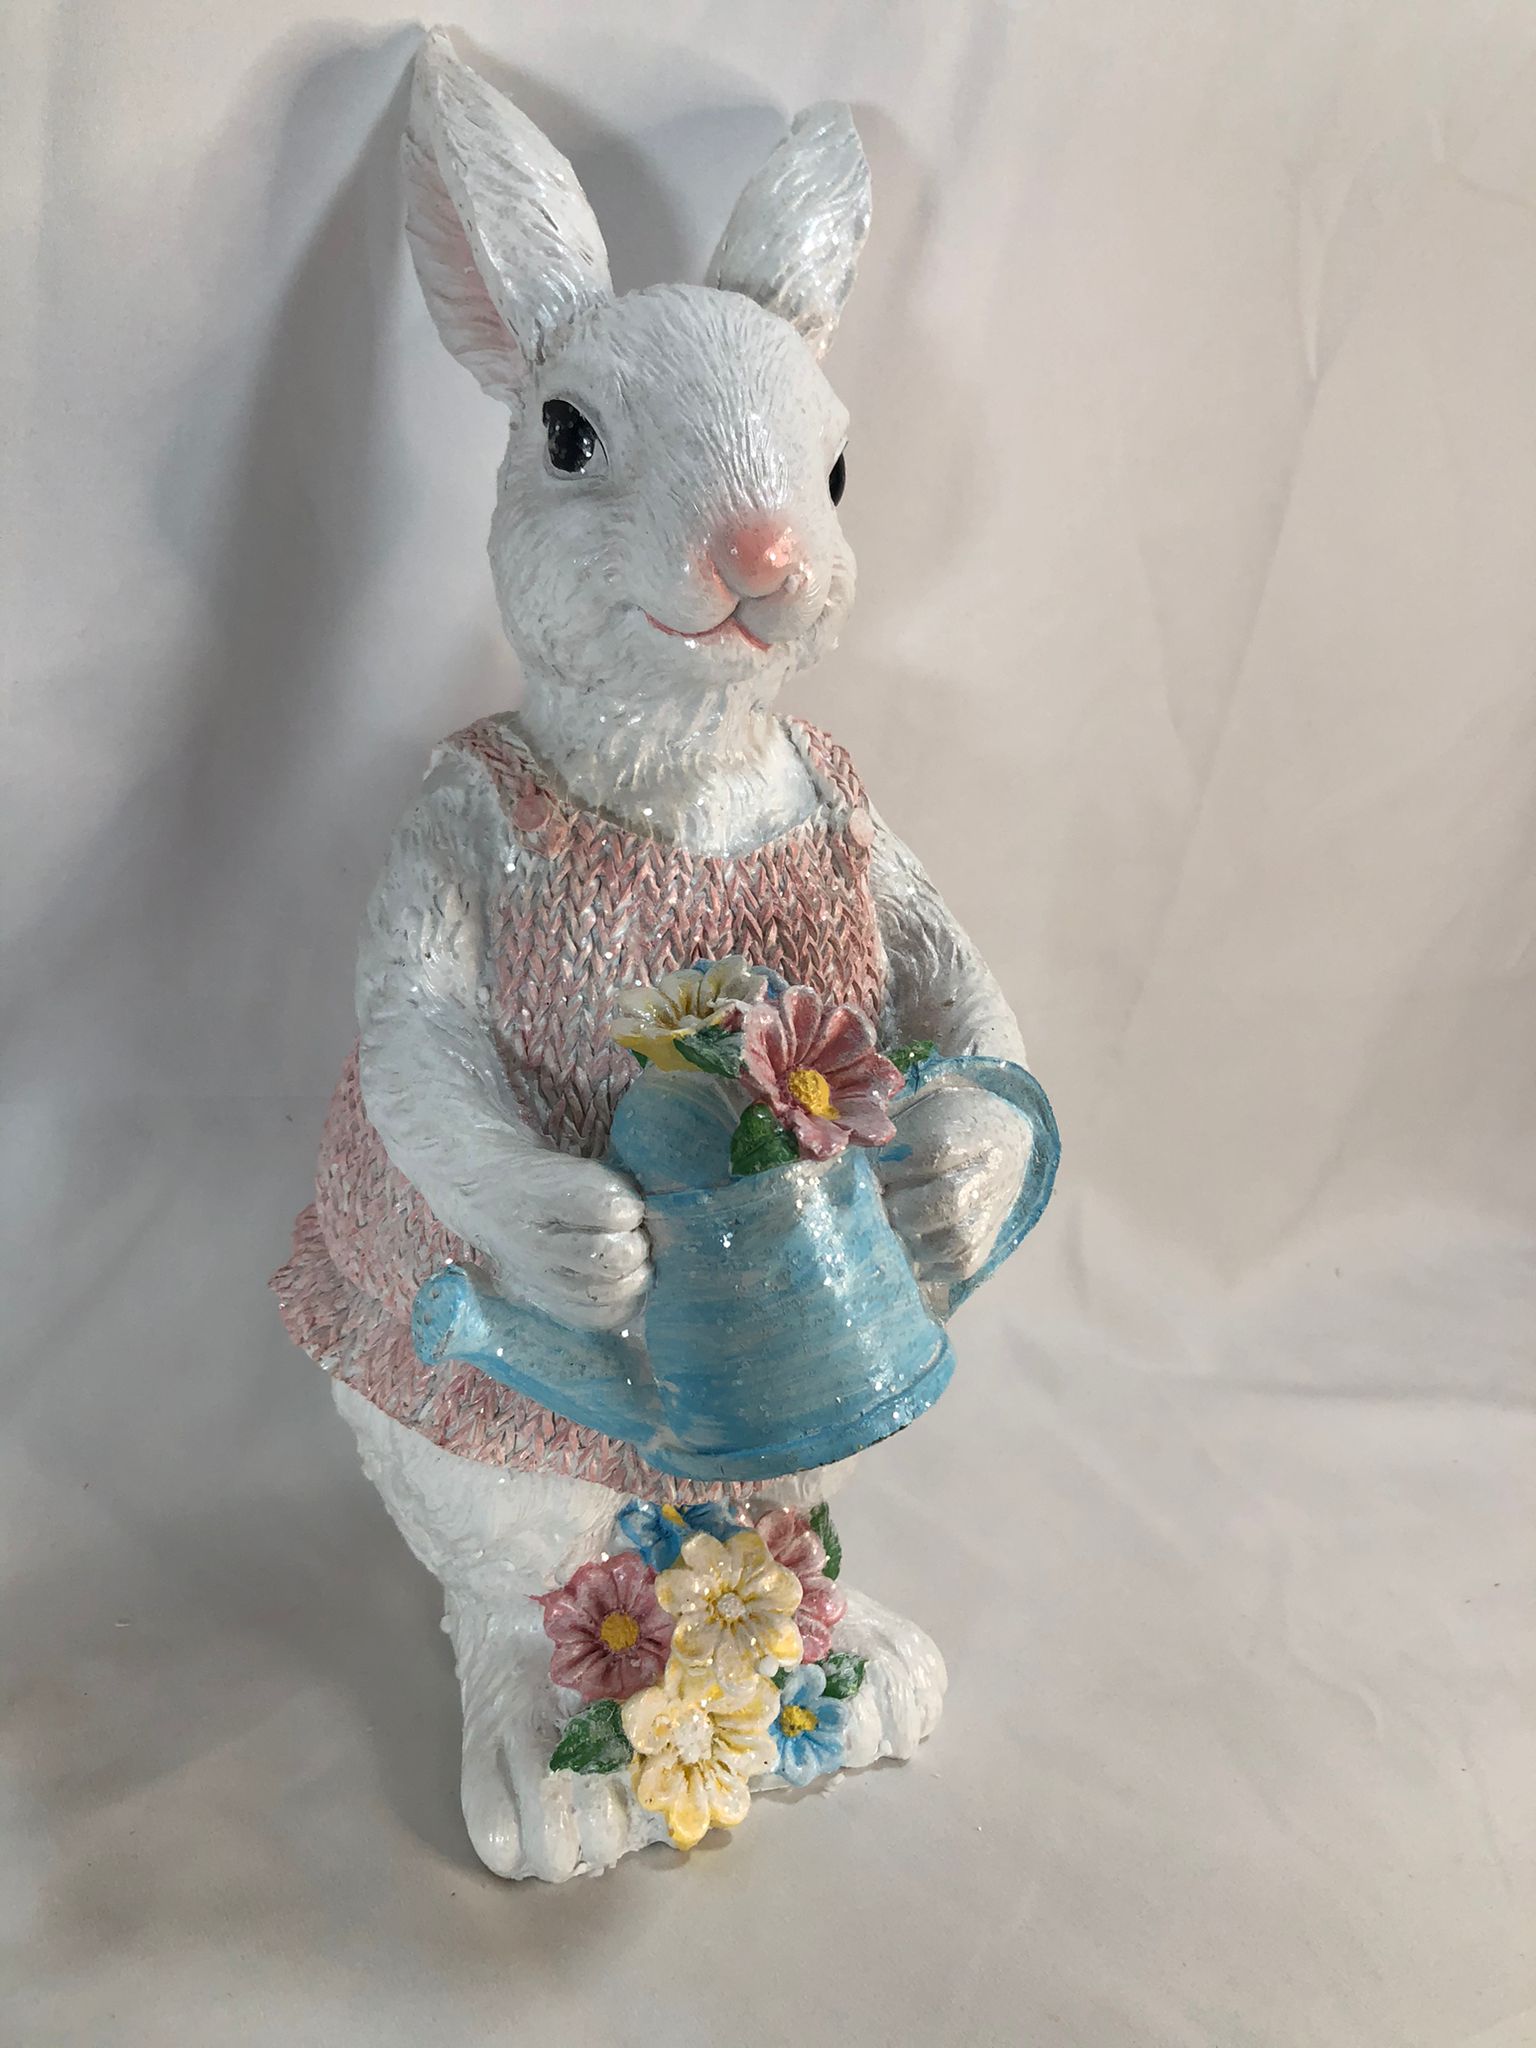 Bunny in Knit Sweater by Valerie